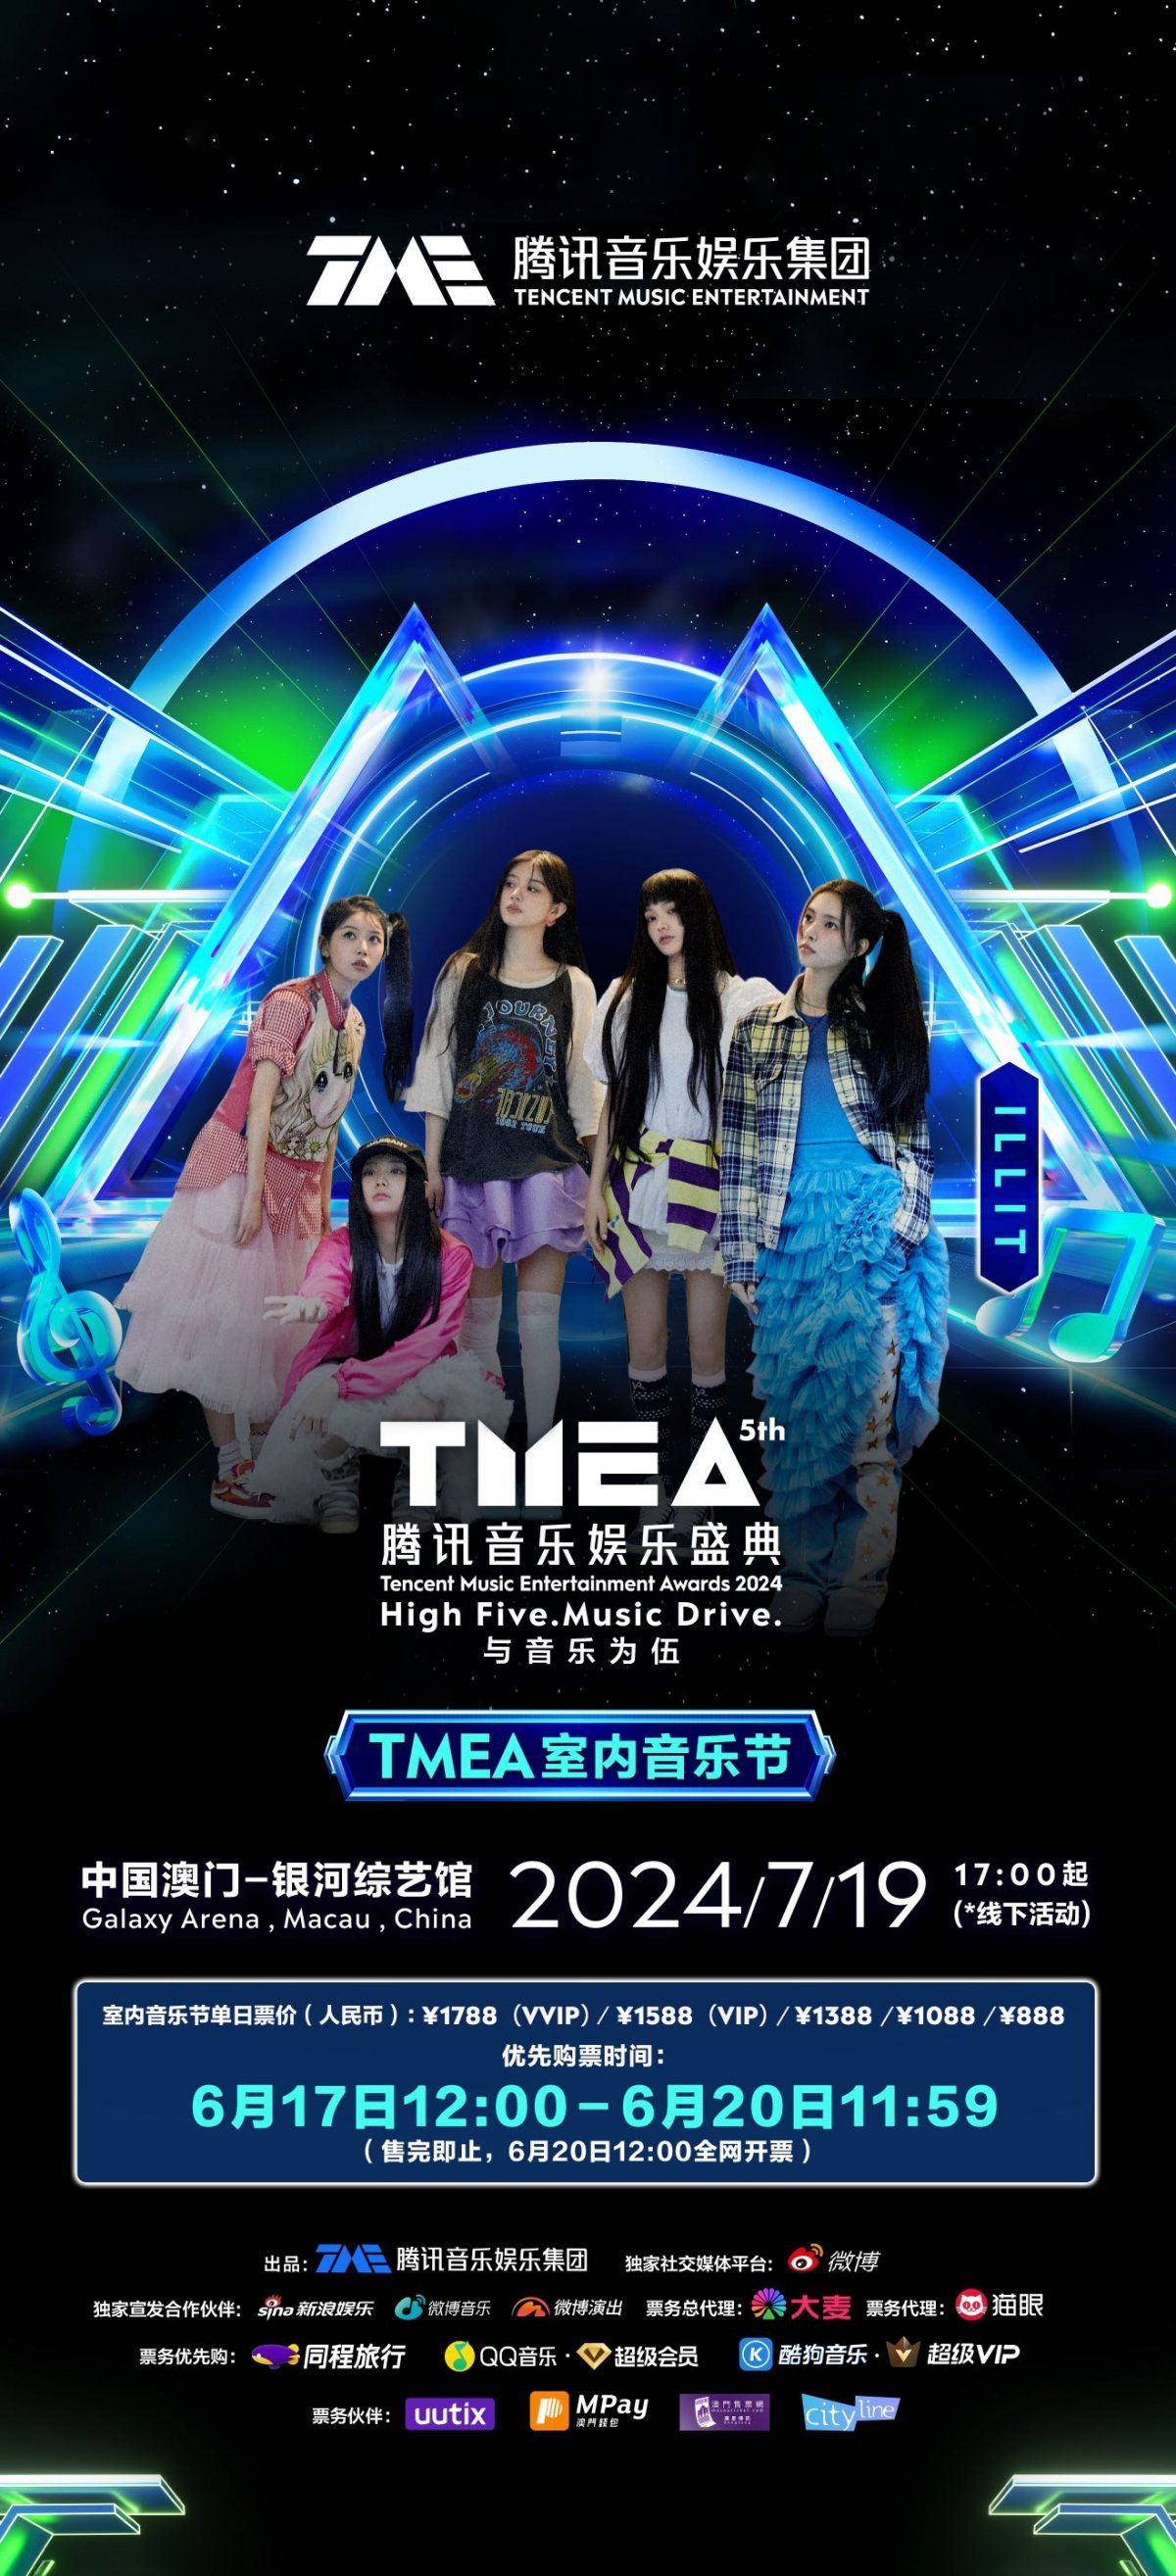 Poster for Illit's participation at 2024 TMEA 5th Tencent Music Entertainment Award in Macau, China, on July 19 (Belift Lab)